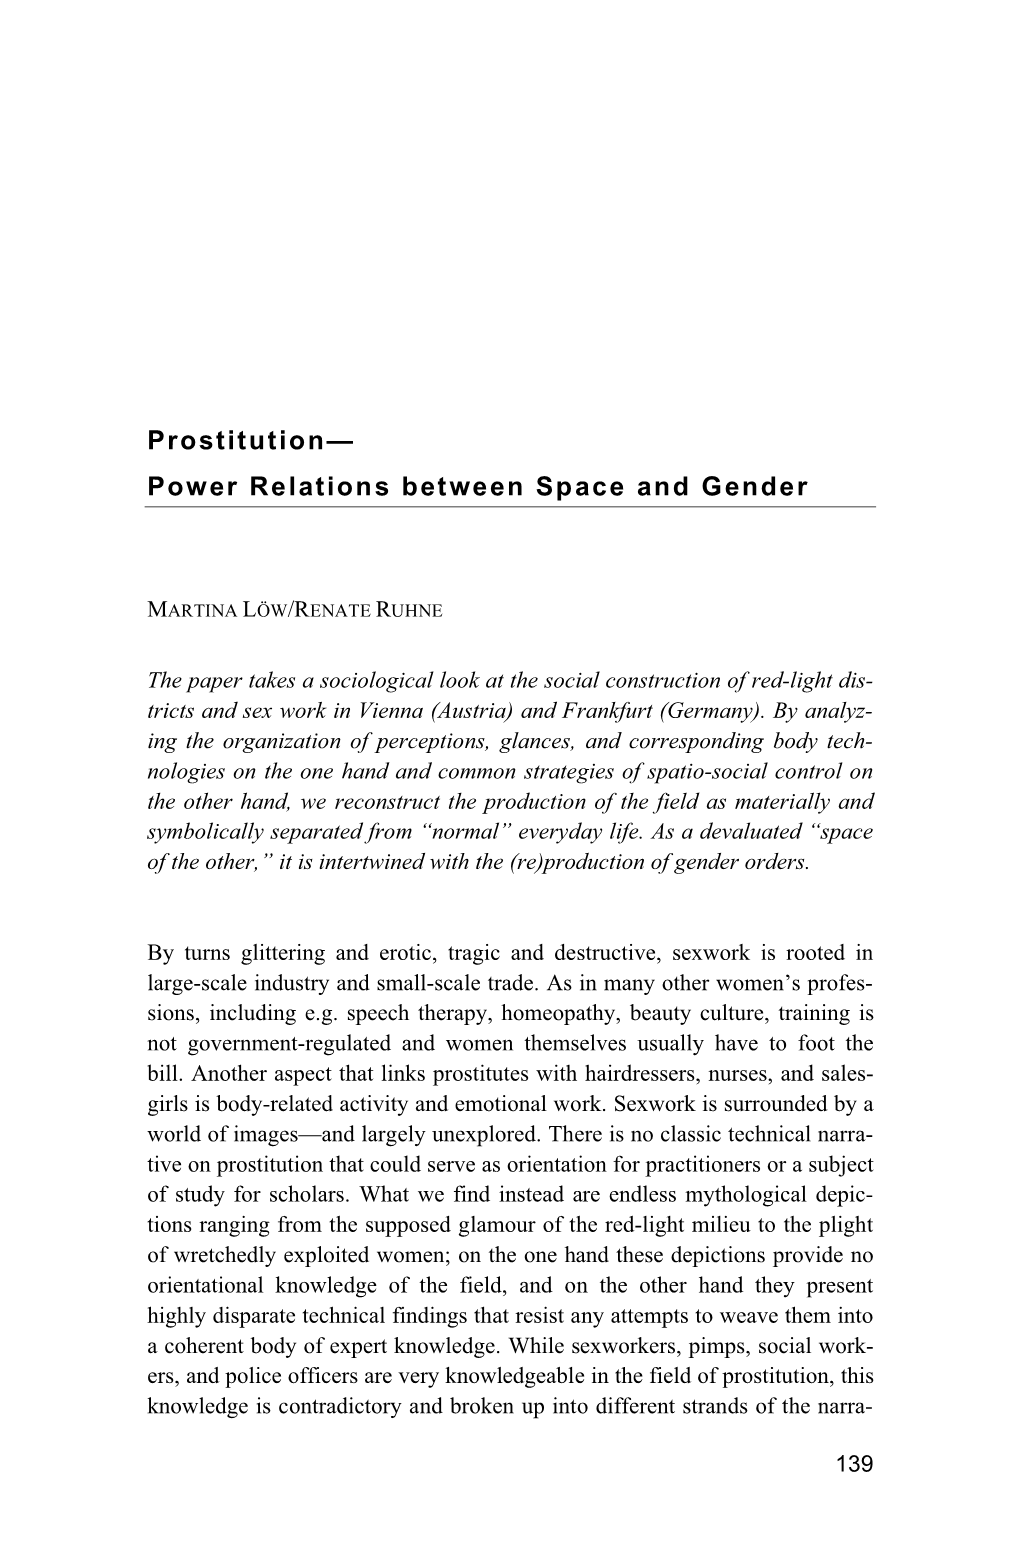 Prostitution— Power Relations Between Space and Gender